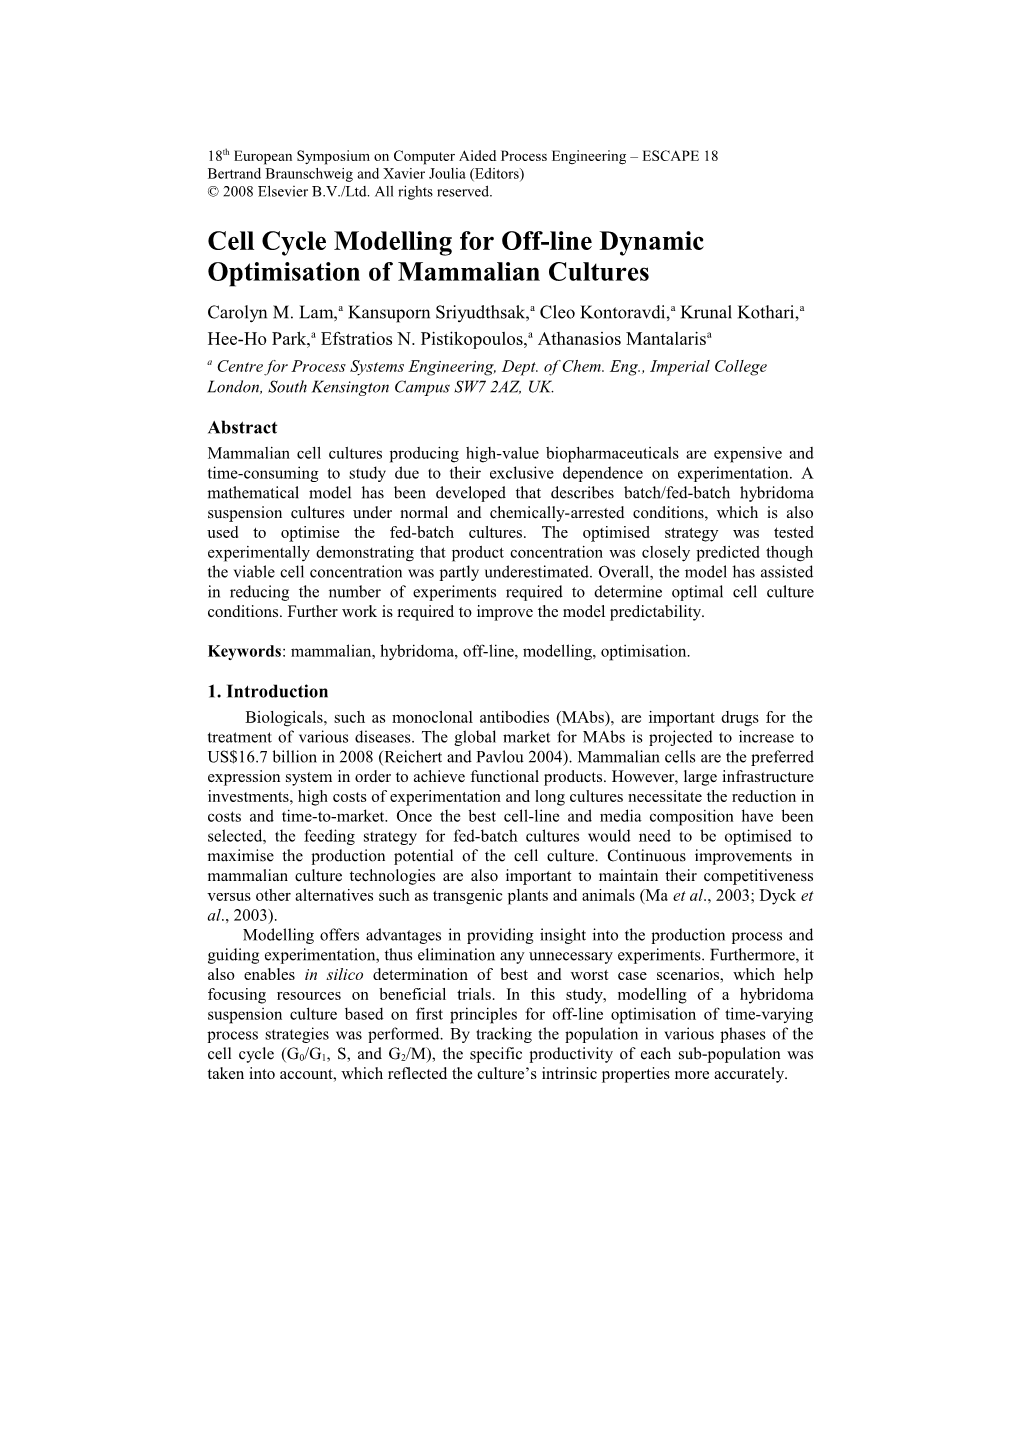 Cell Cycle Modelling for Off-Line Dynamic Optimisation of Mammalian Cultures